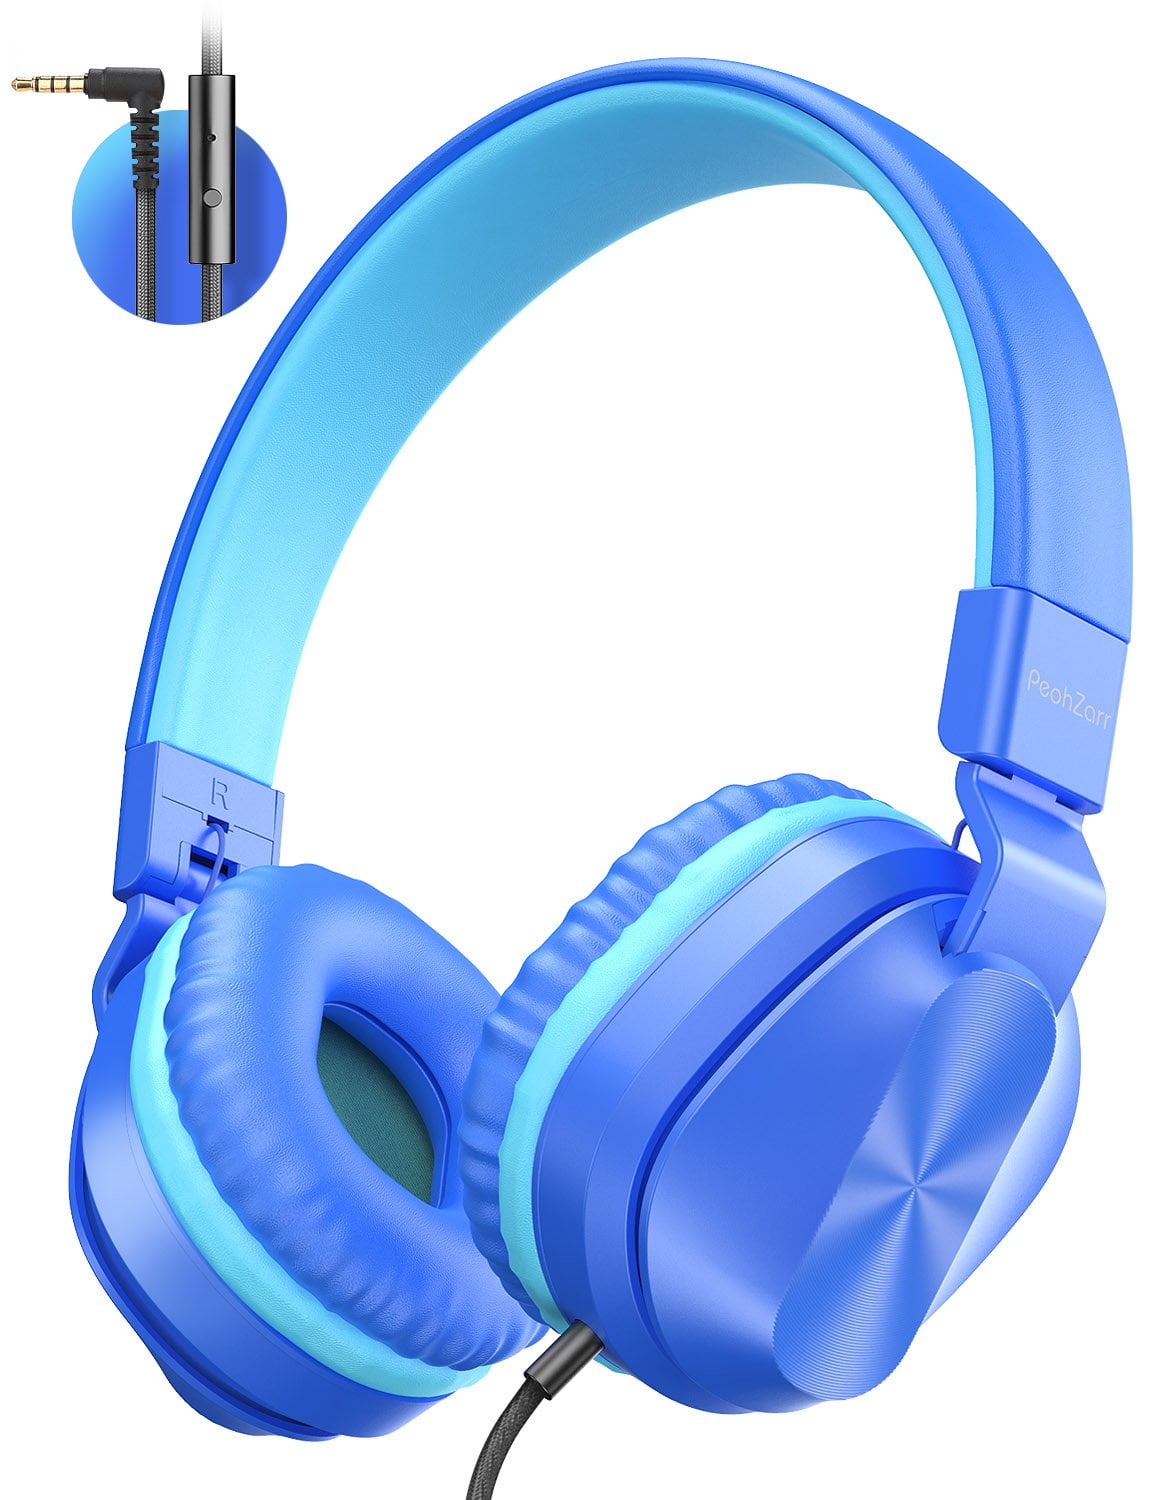 Headphone on-Ear Foldable Adjustable swivel function for a perfect fit Wired 